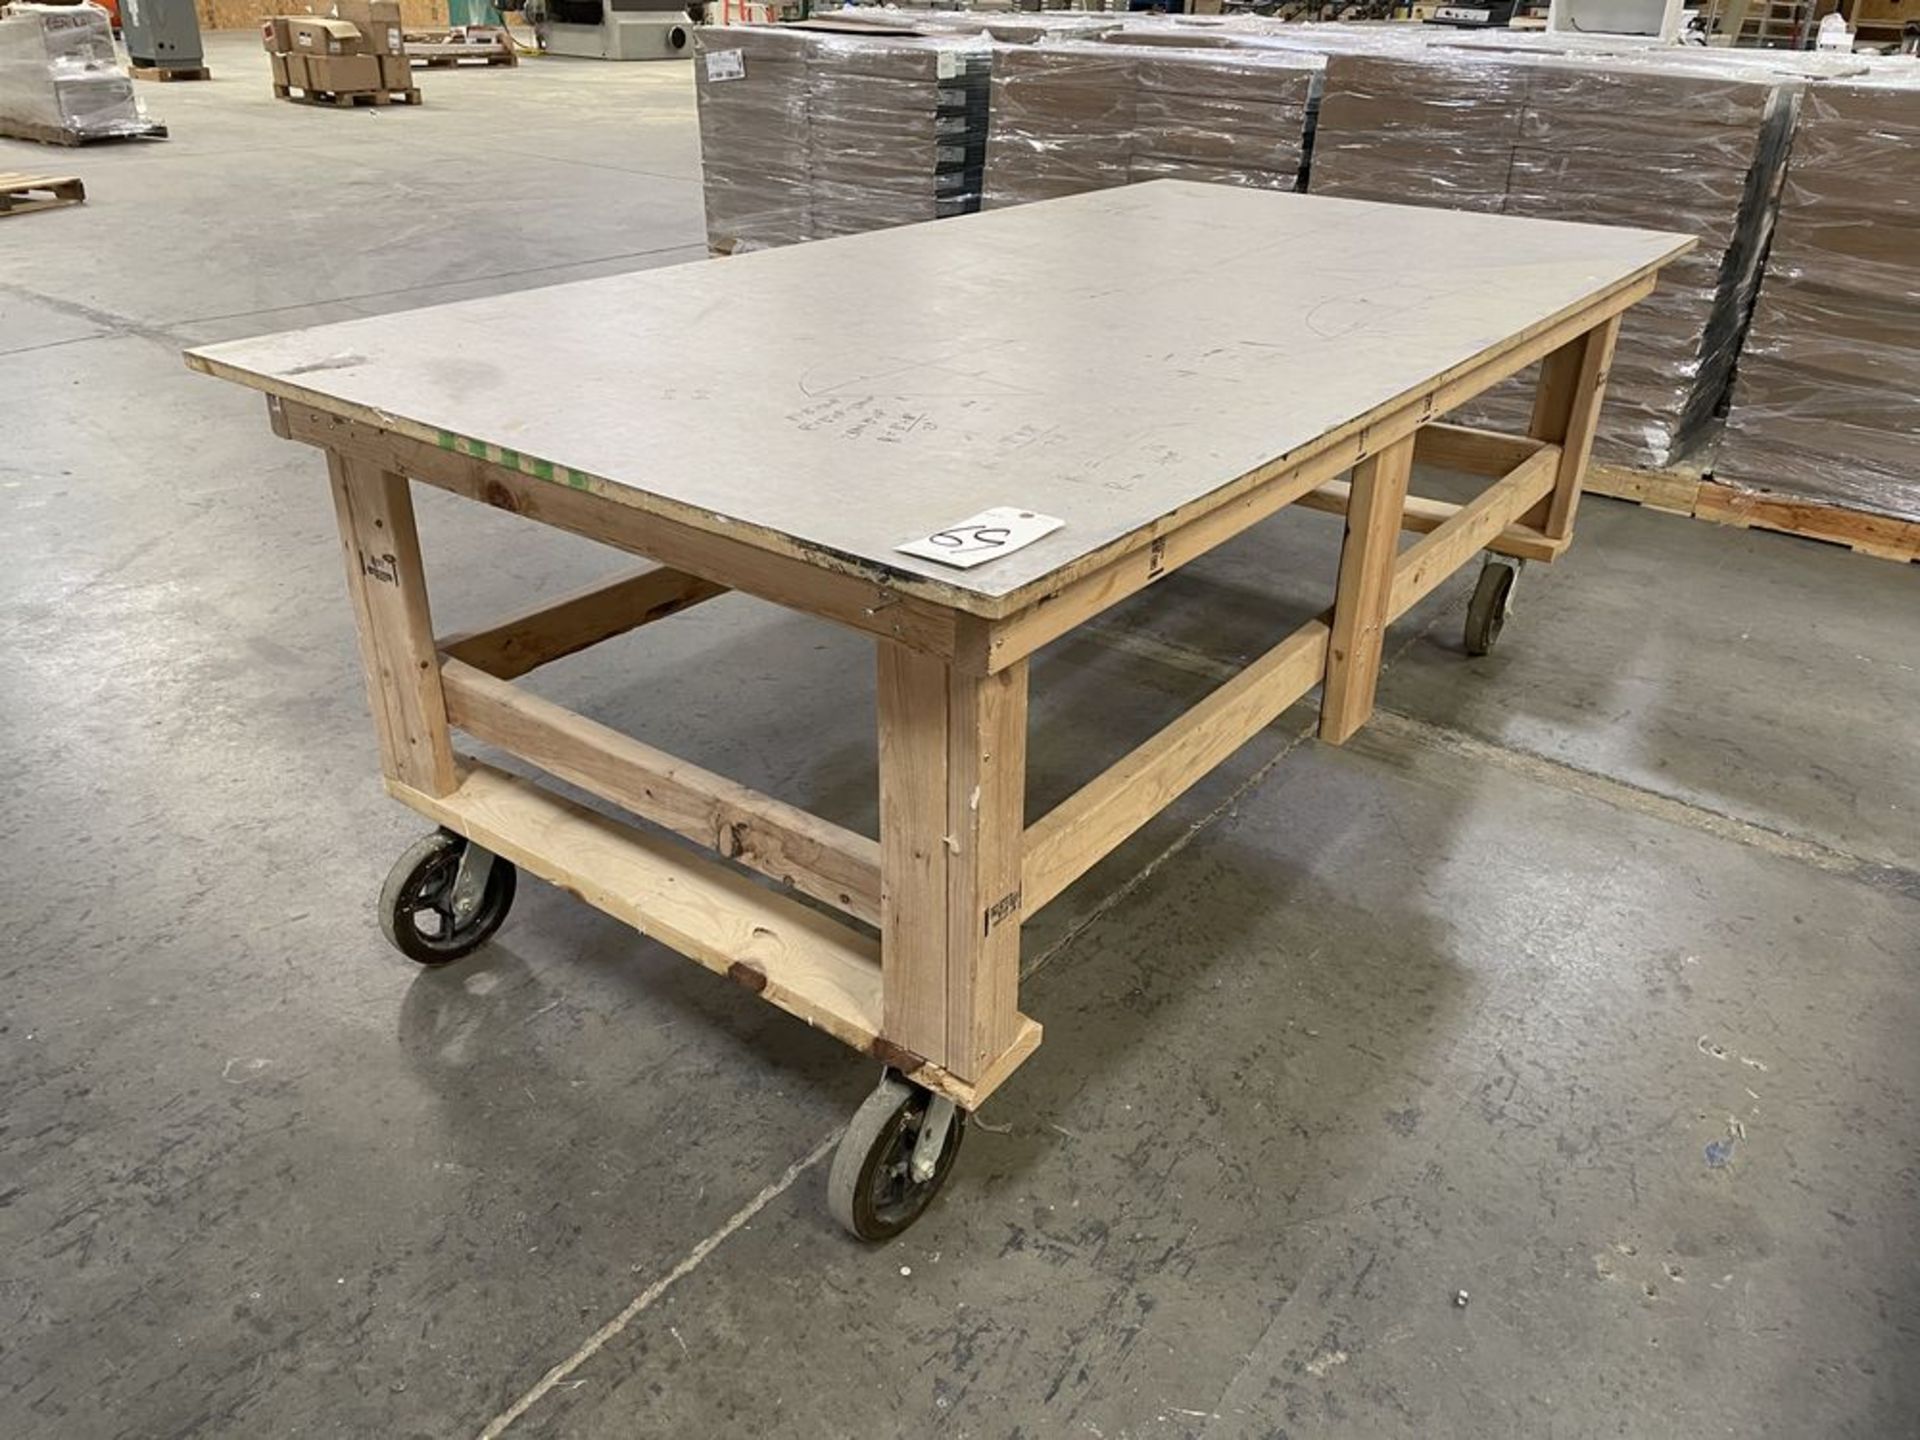 48" x 97" x 35" Wooden Roller Table.